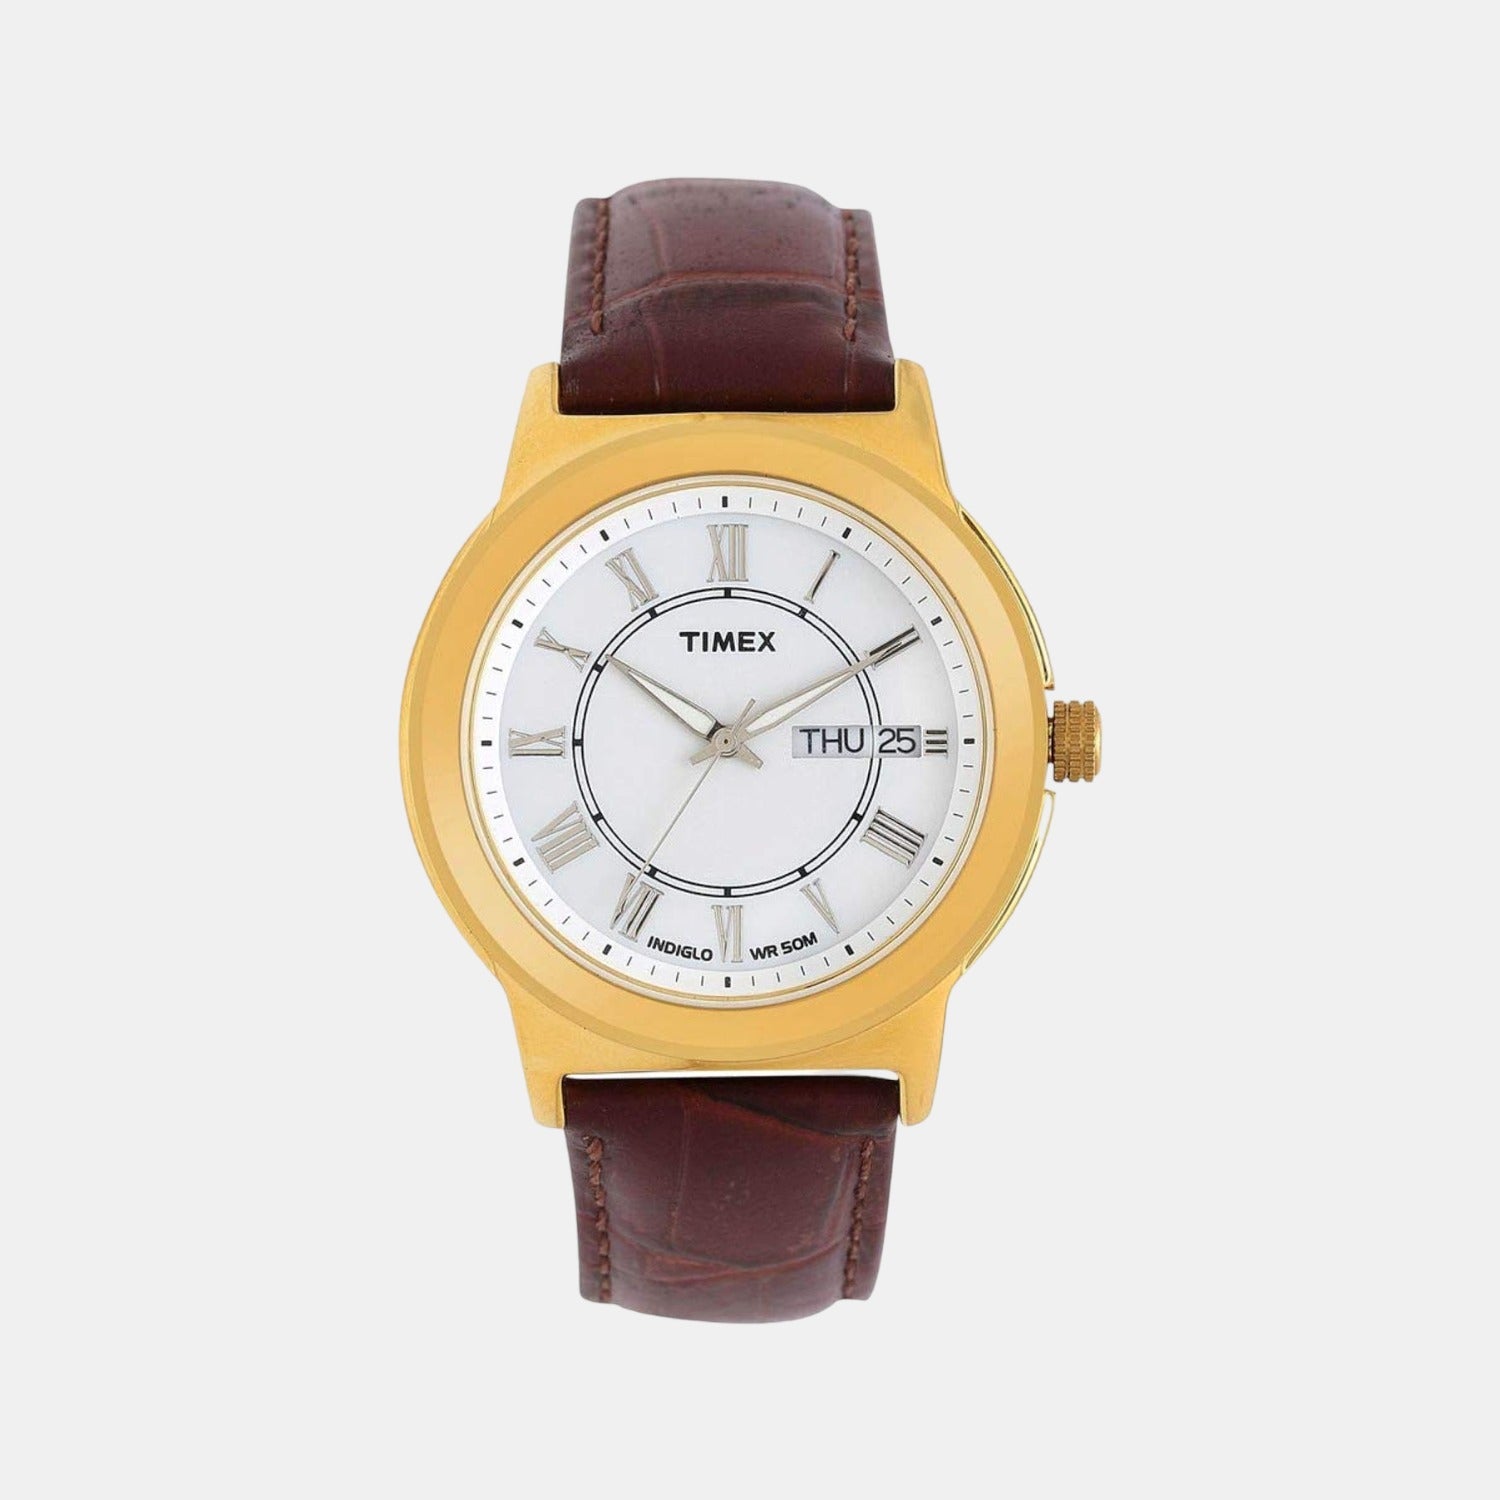 Timex | Shop Classic and Affordable Timepieces at Windup Watch Shop